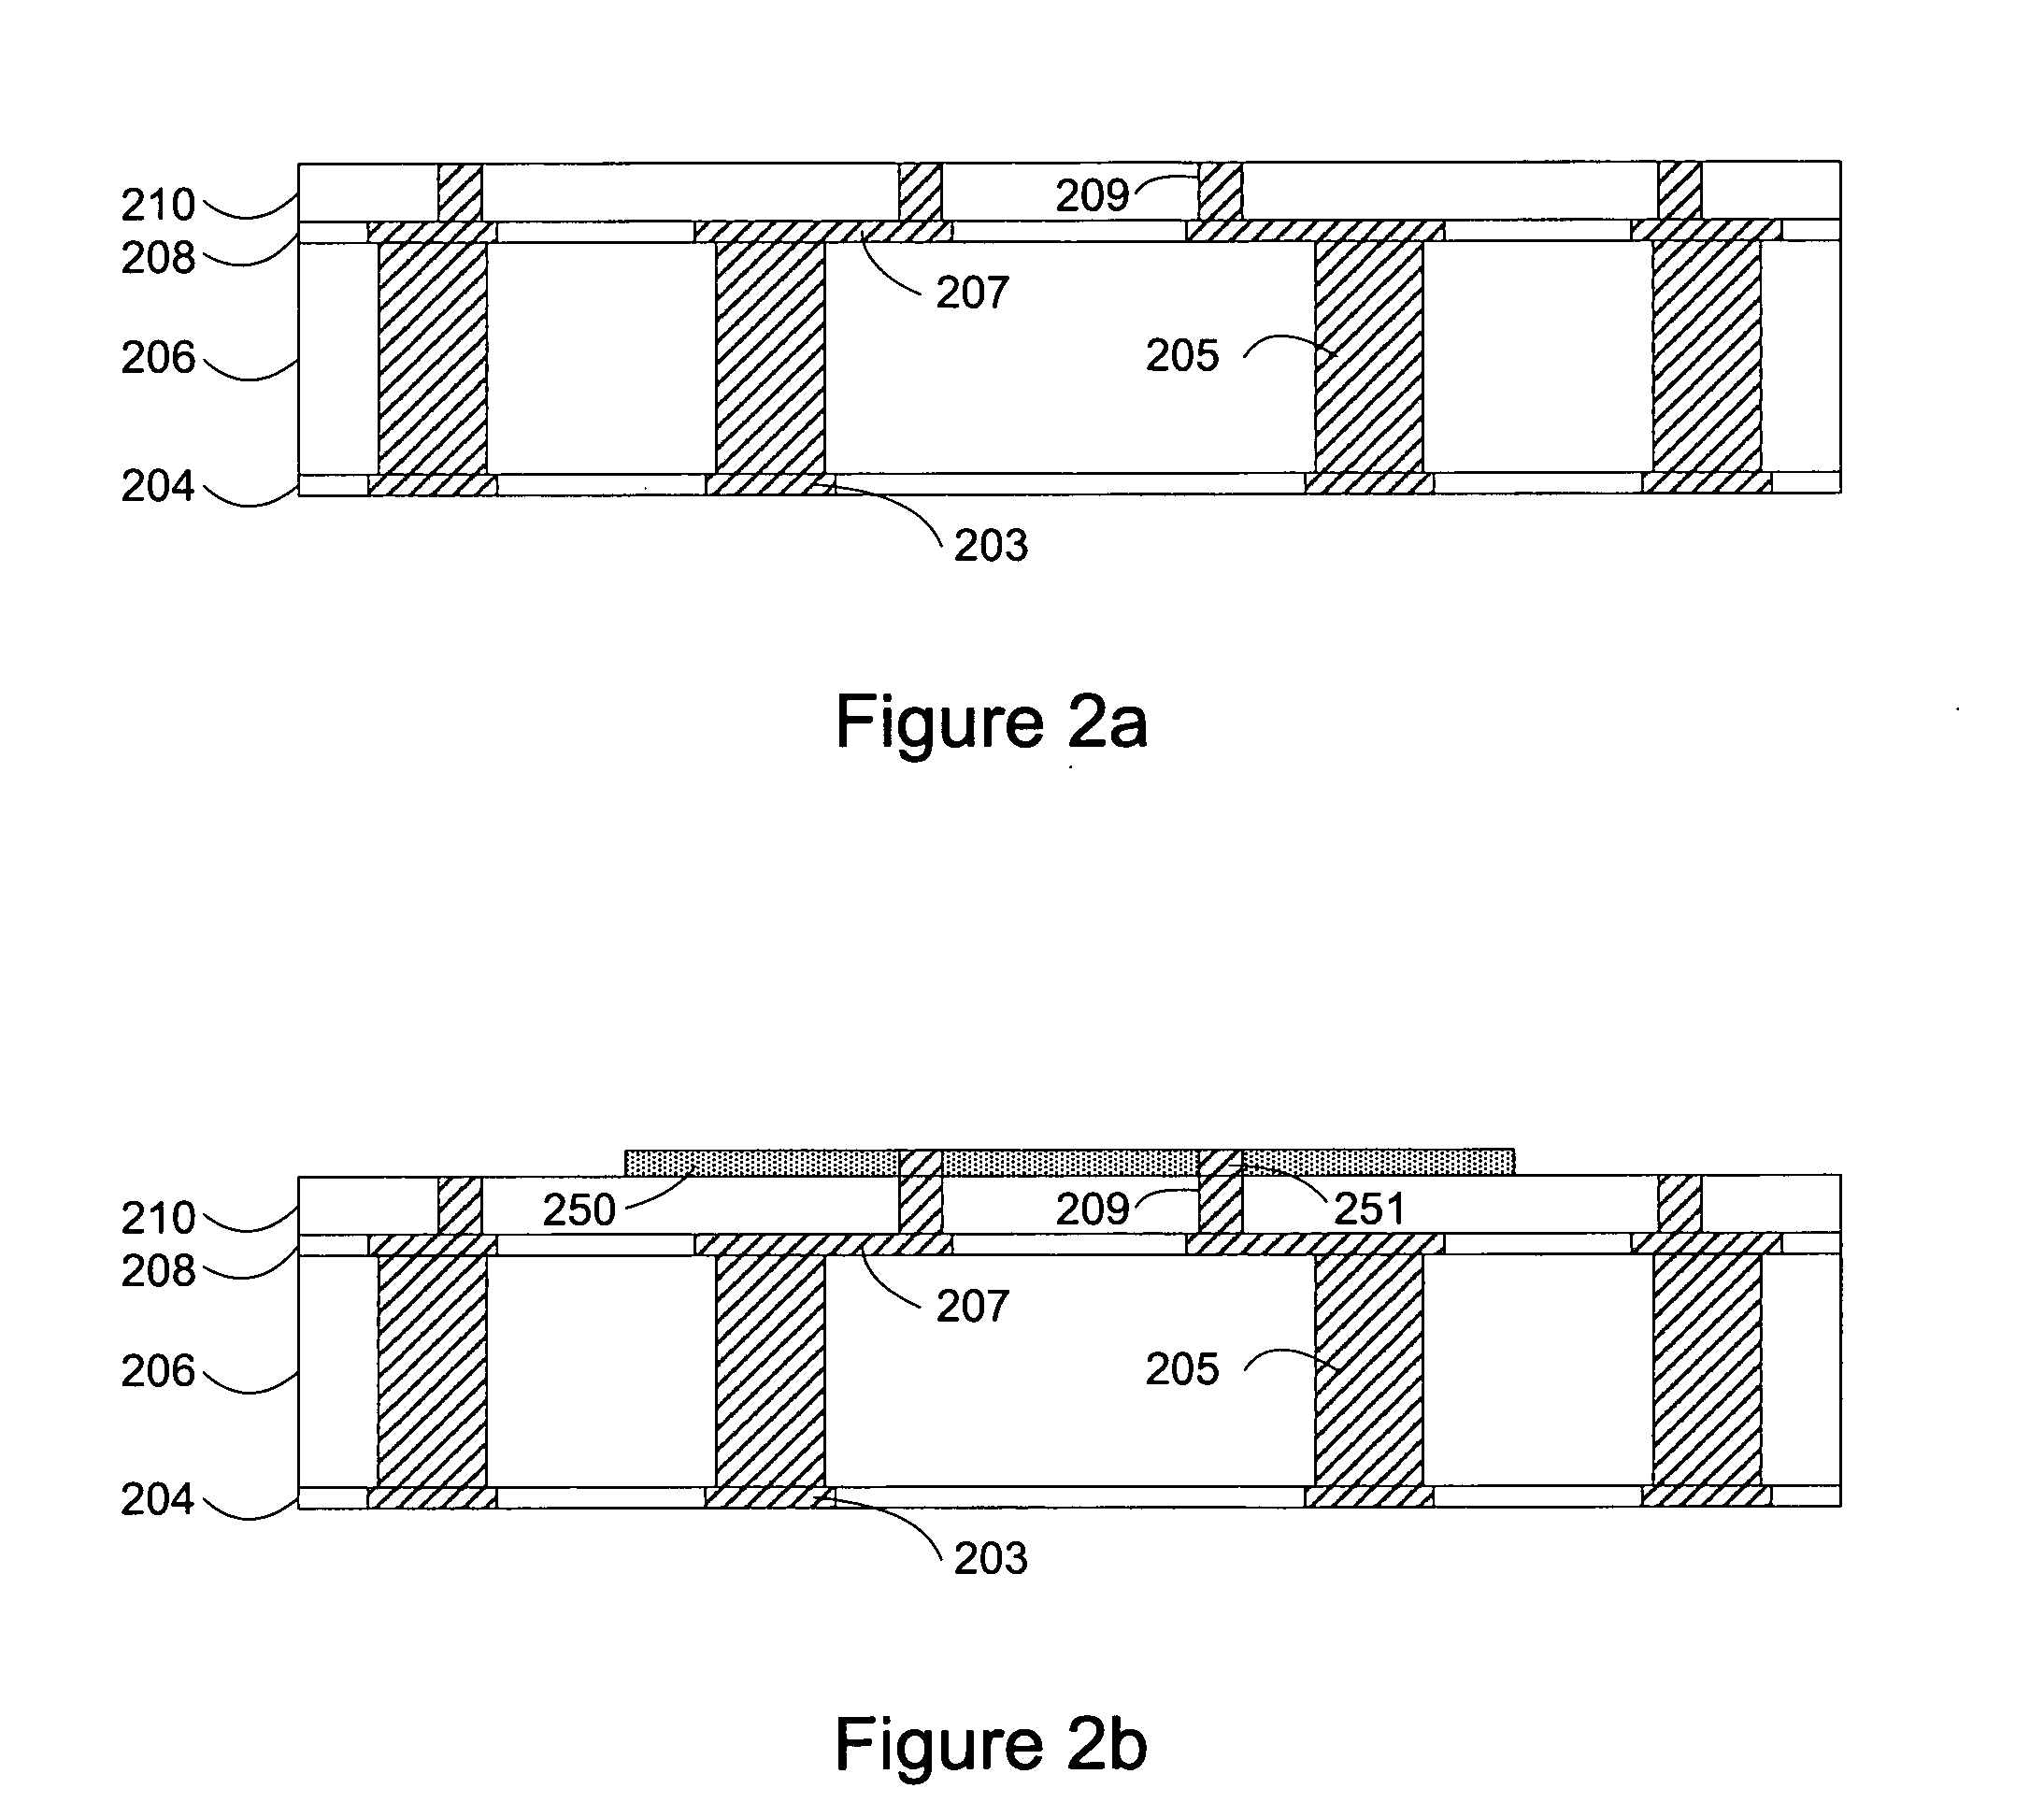 Embedded capacitors for reducing package cracking